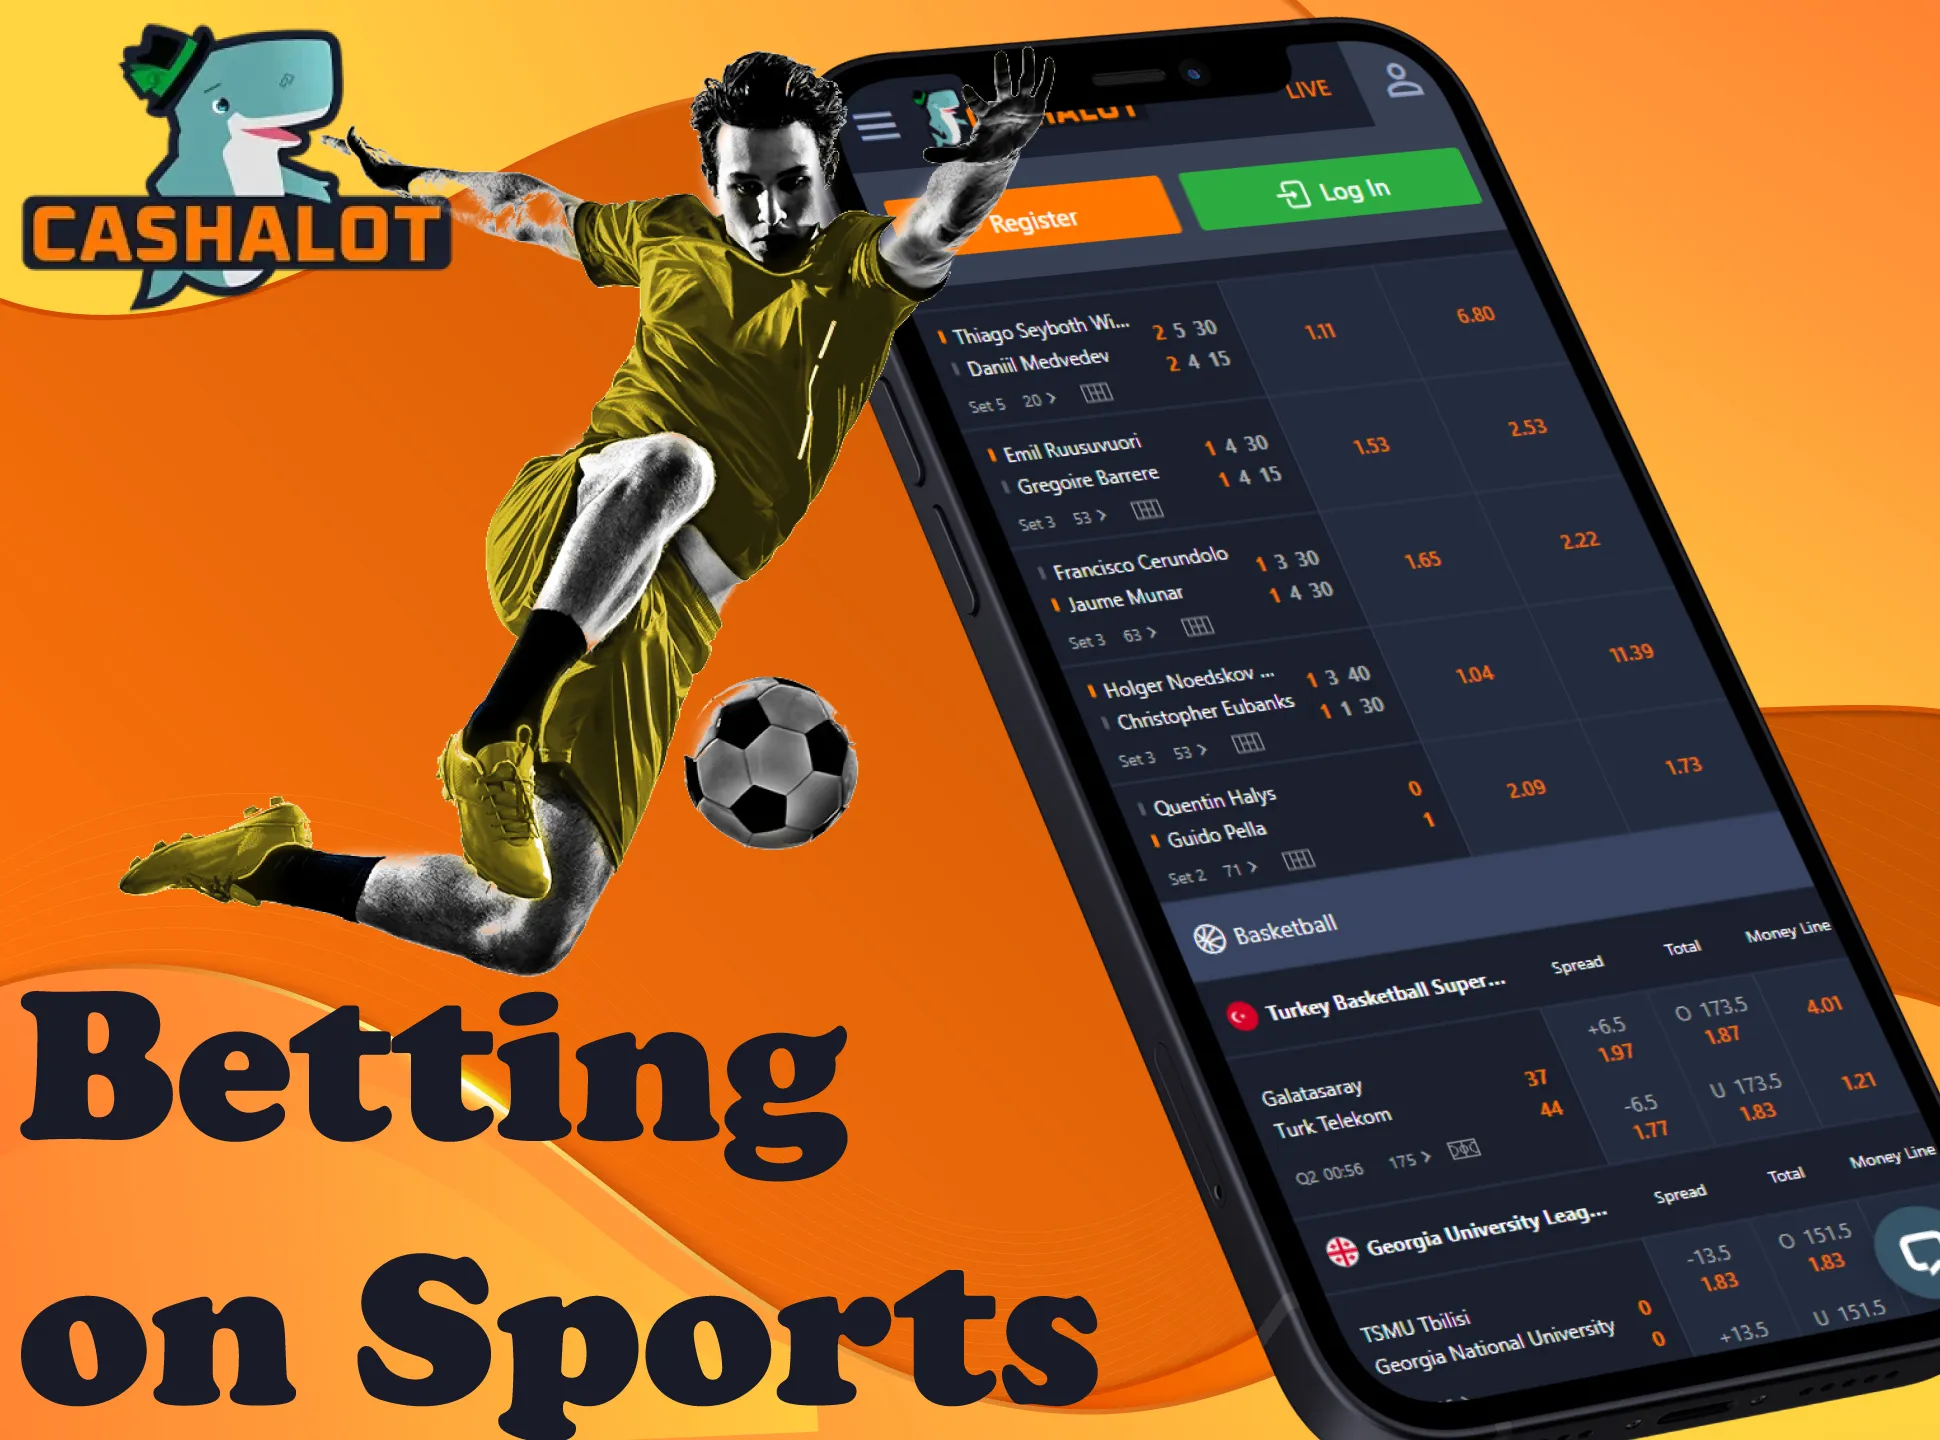 Bet on your favorite sports in the Cashalot app.